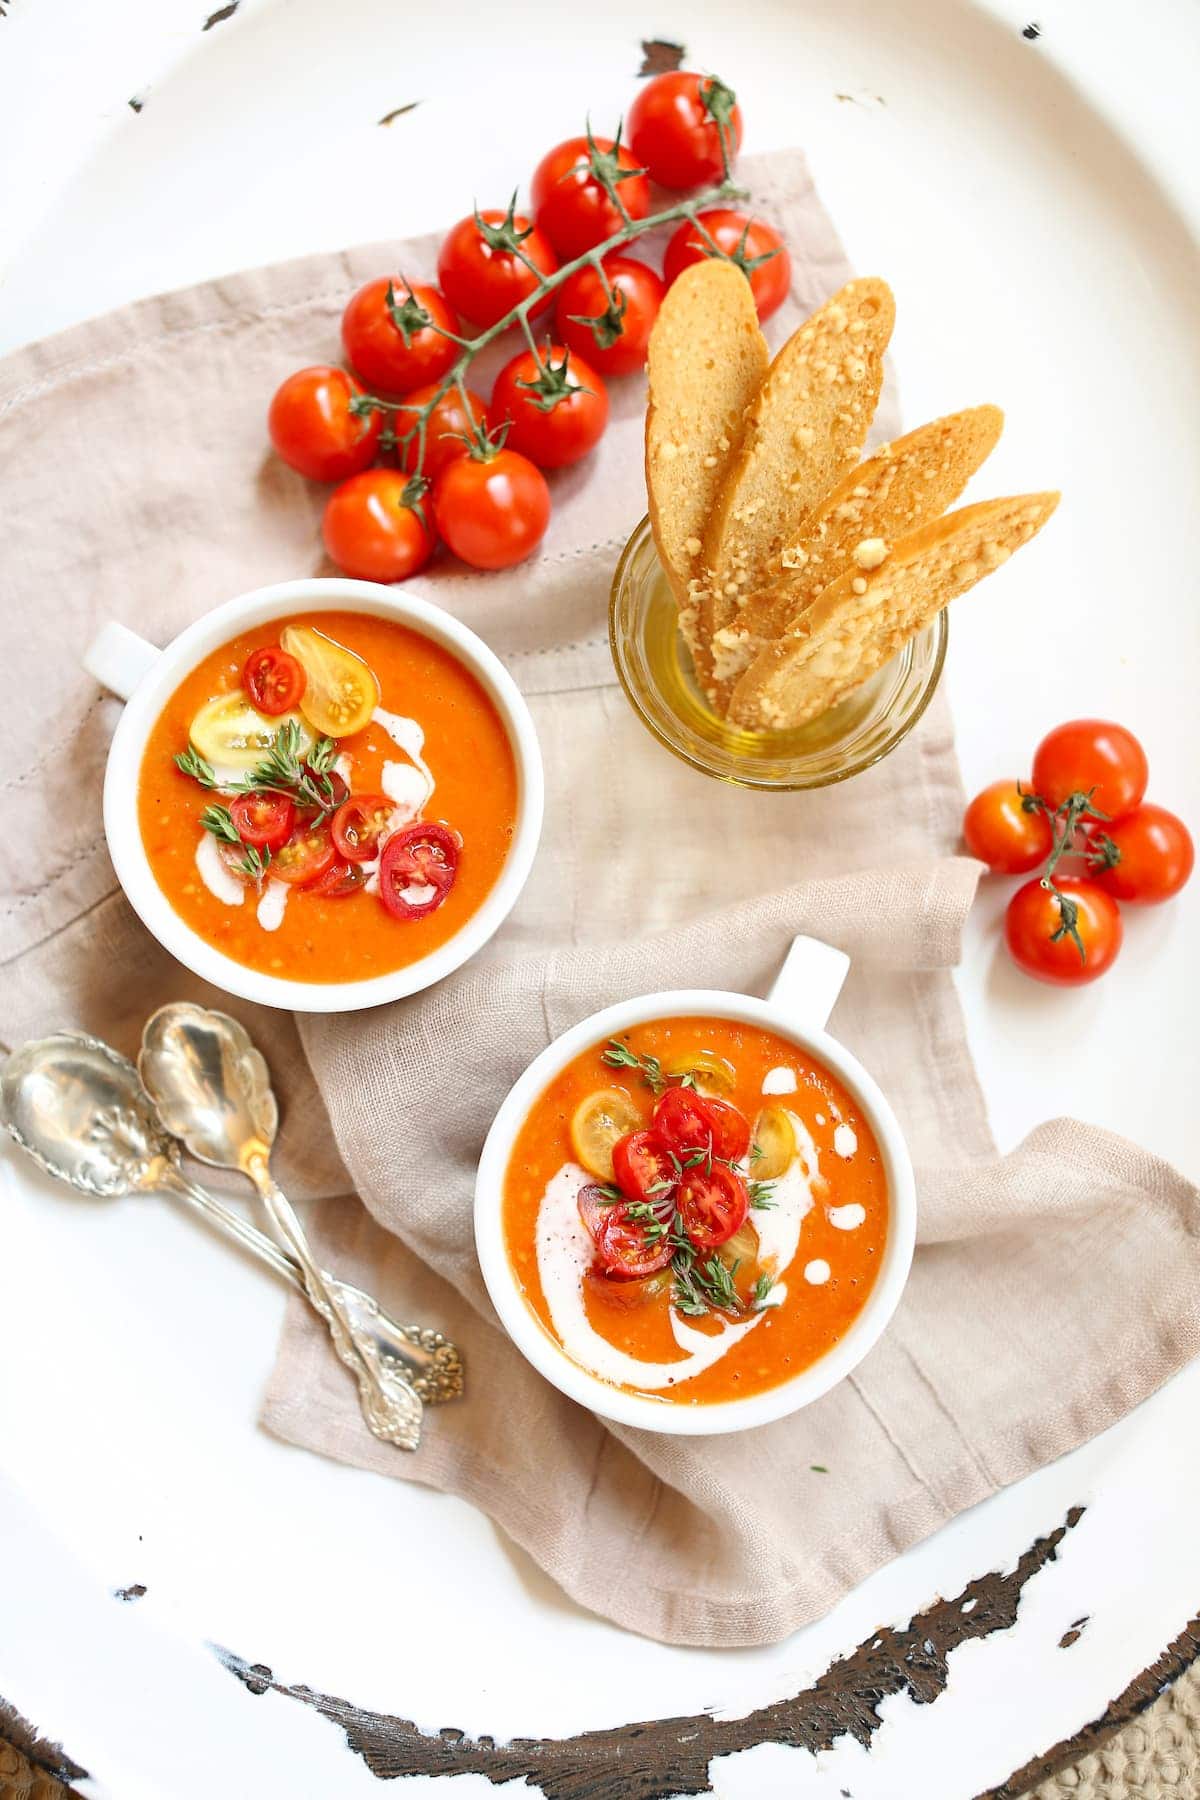 a white platter with two white bowls of tomato soup and some crackers on them, along with some fresh tomatoes and spoons.